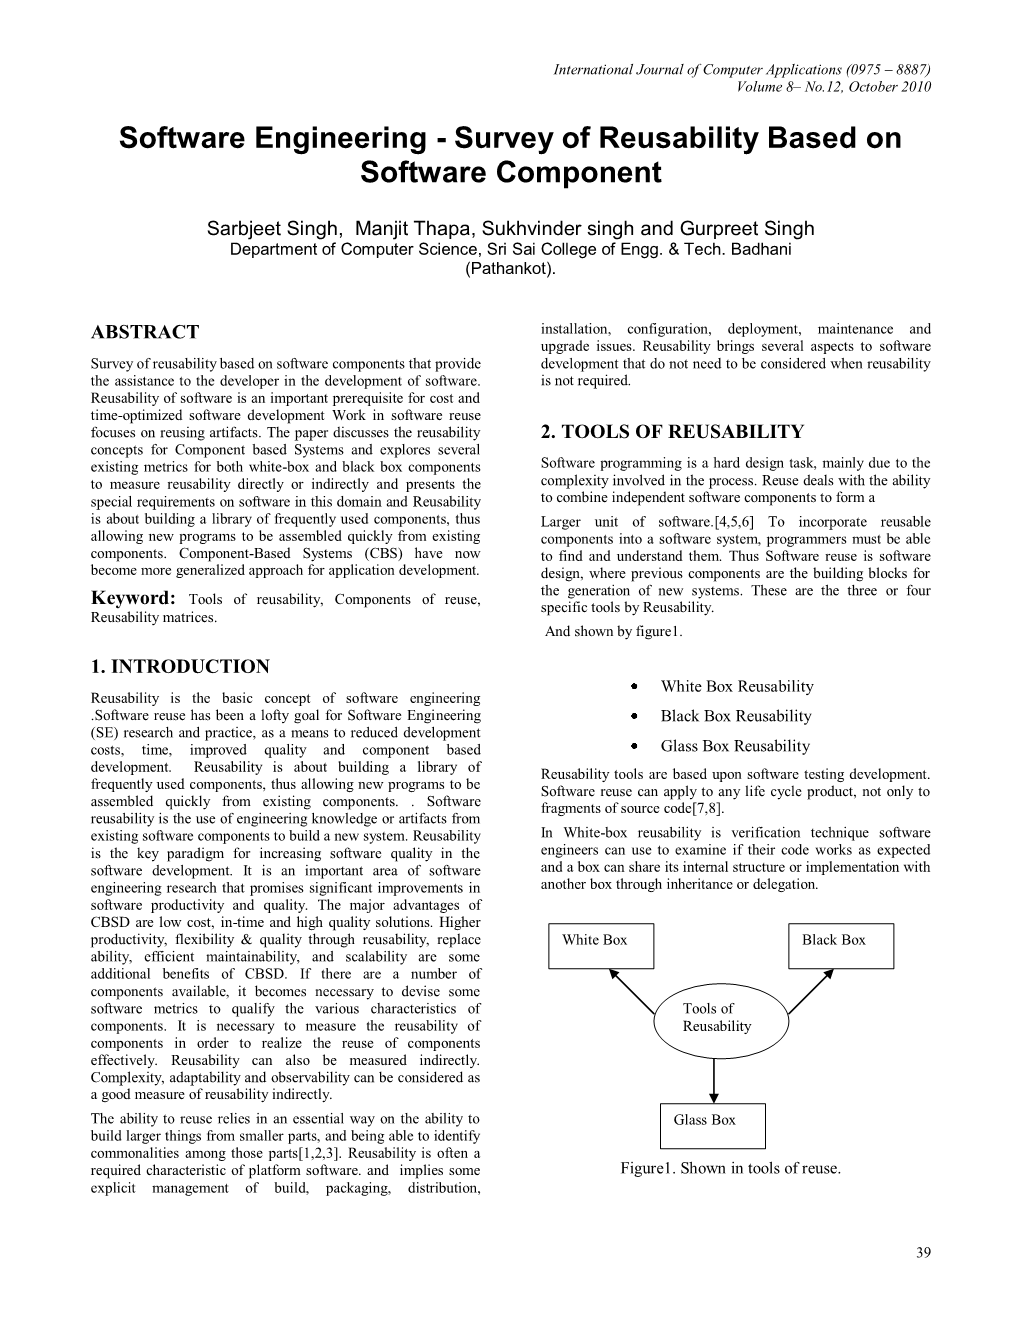 Survey of Reusability Based on Software Component